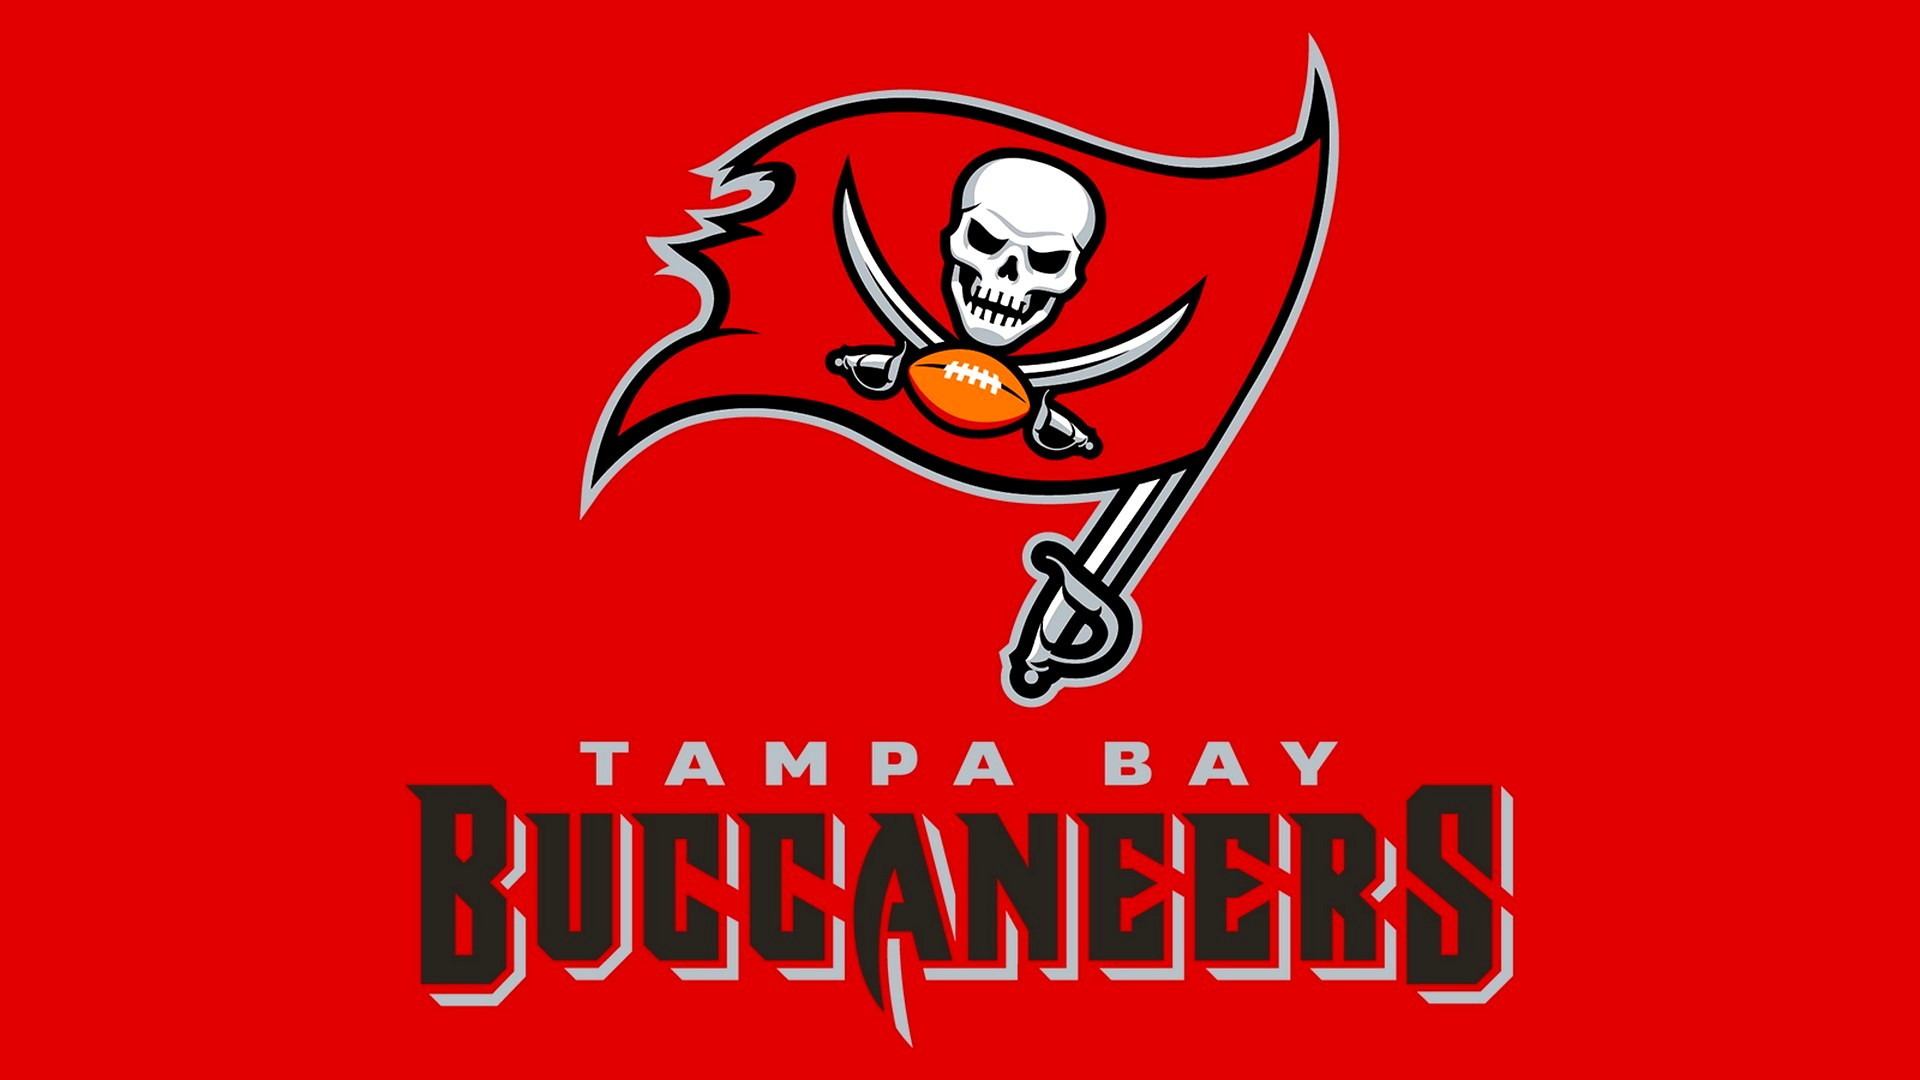 Tampa Bay Buccaneers Desktop Wallpaper HD with high-resolution 1920x1080 pixel. You can use and set as wallpaper for Notebook Screensavers, Mac Wallpapers, Mobile Home Screen, iPhone or Android Phones Lock Screen